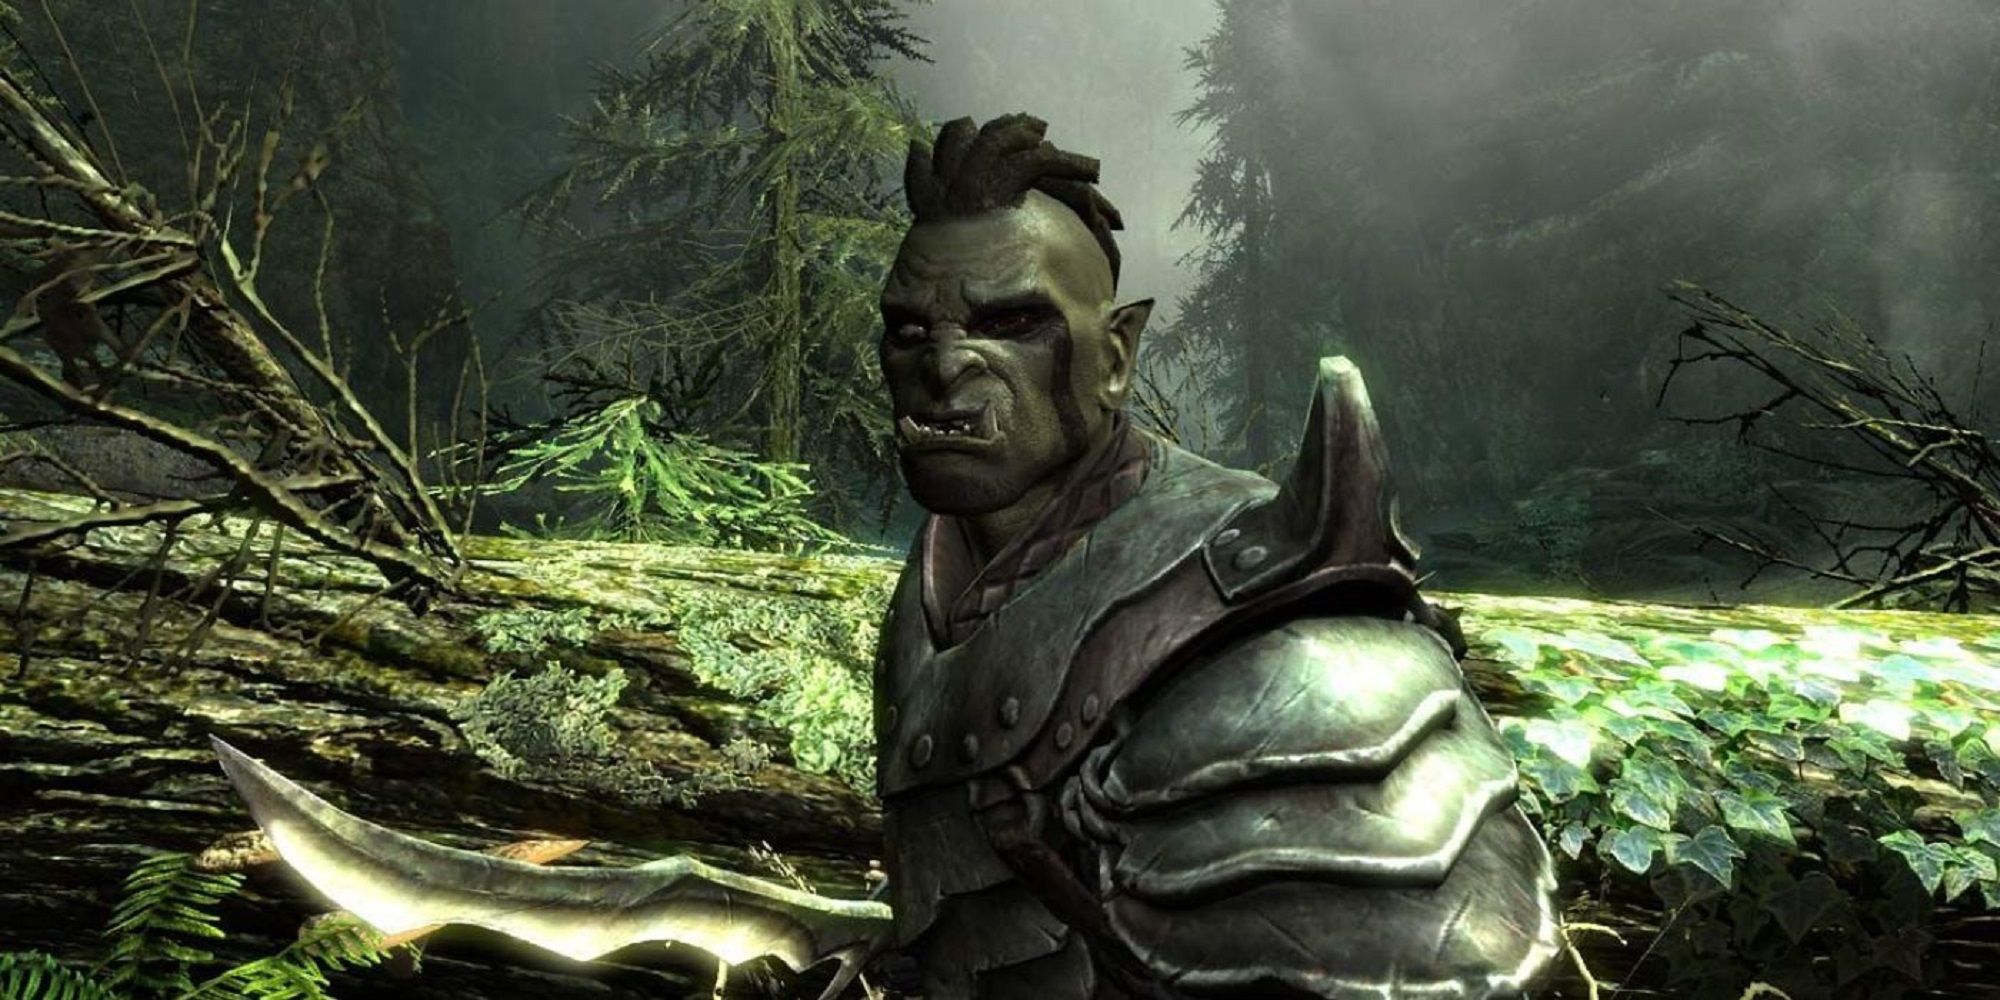 Skyrim Orc character in a forest